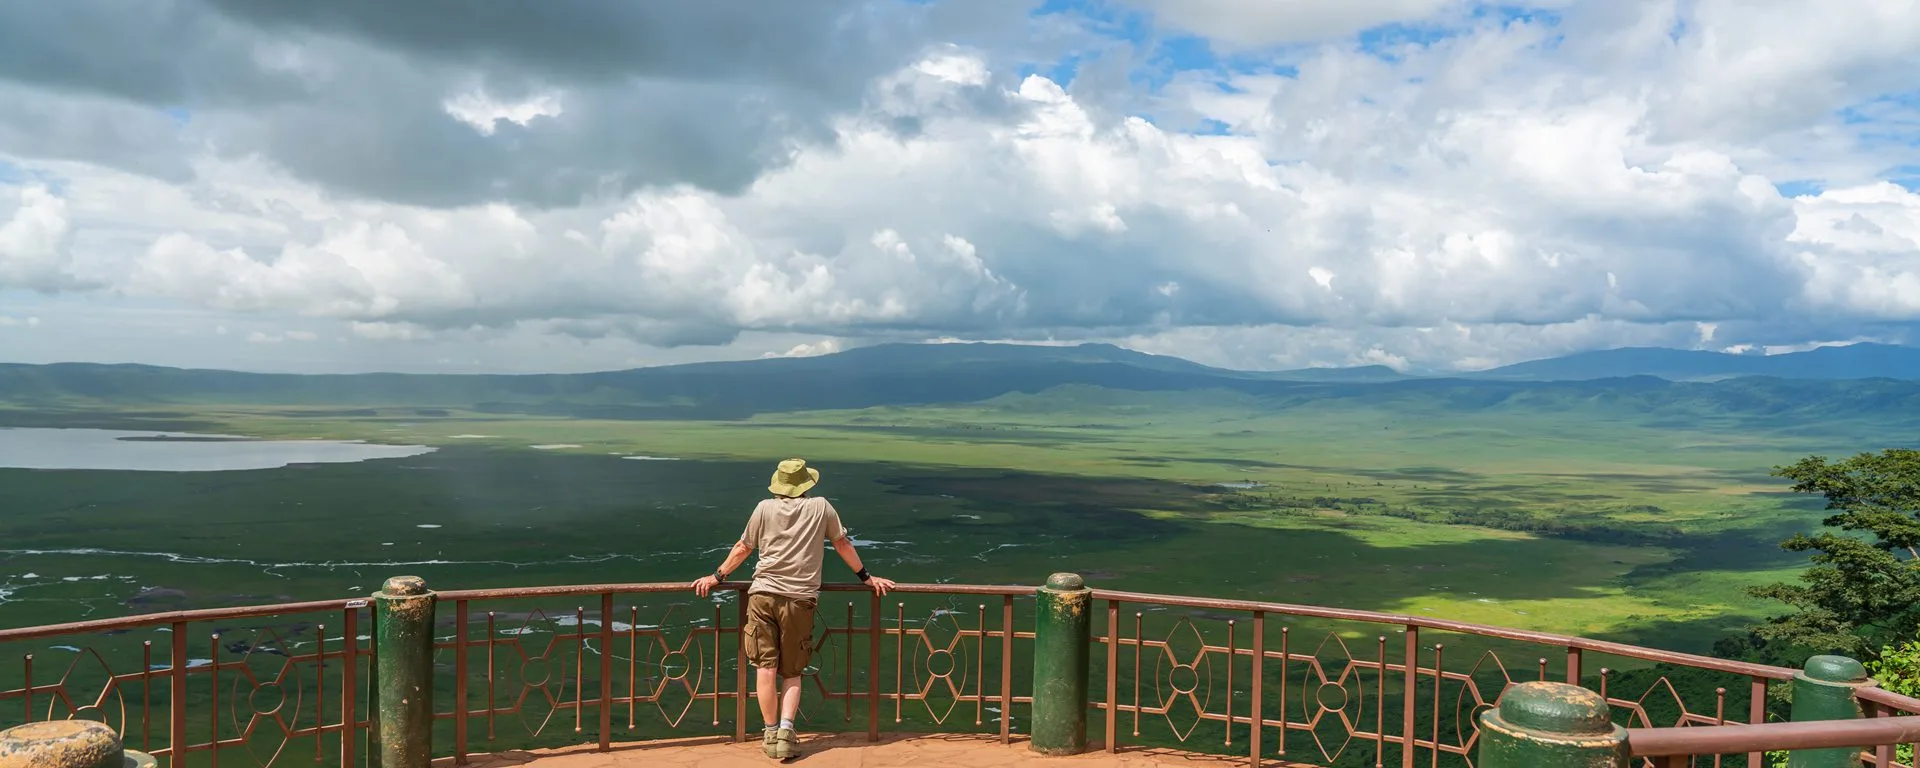 facts-about-Ngorongoro-Crater (1)